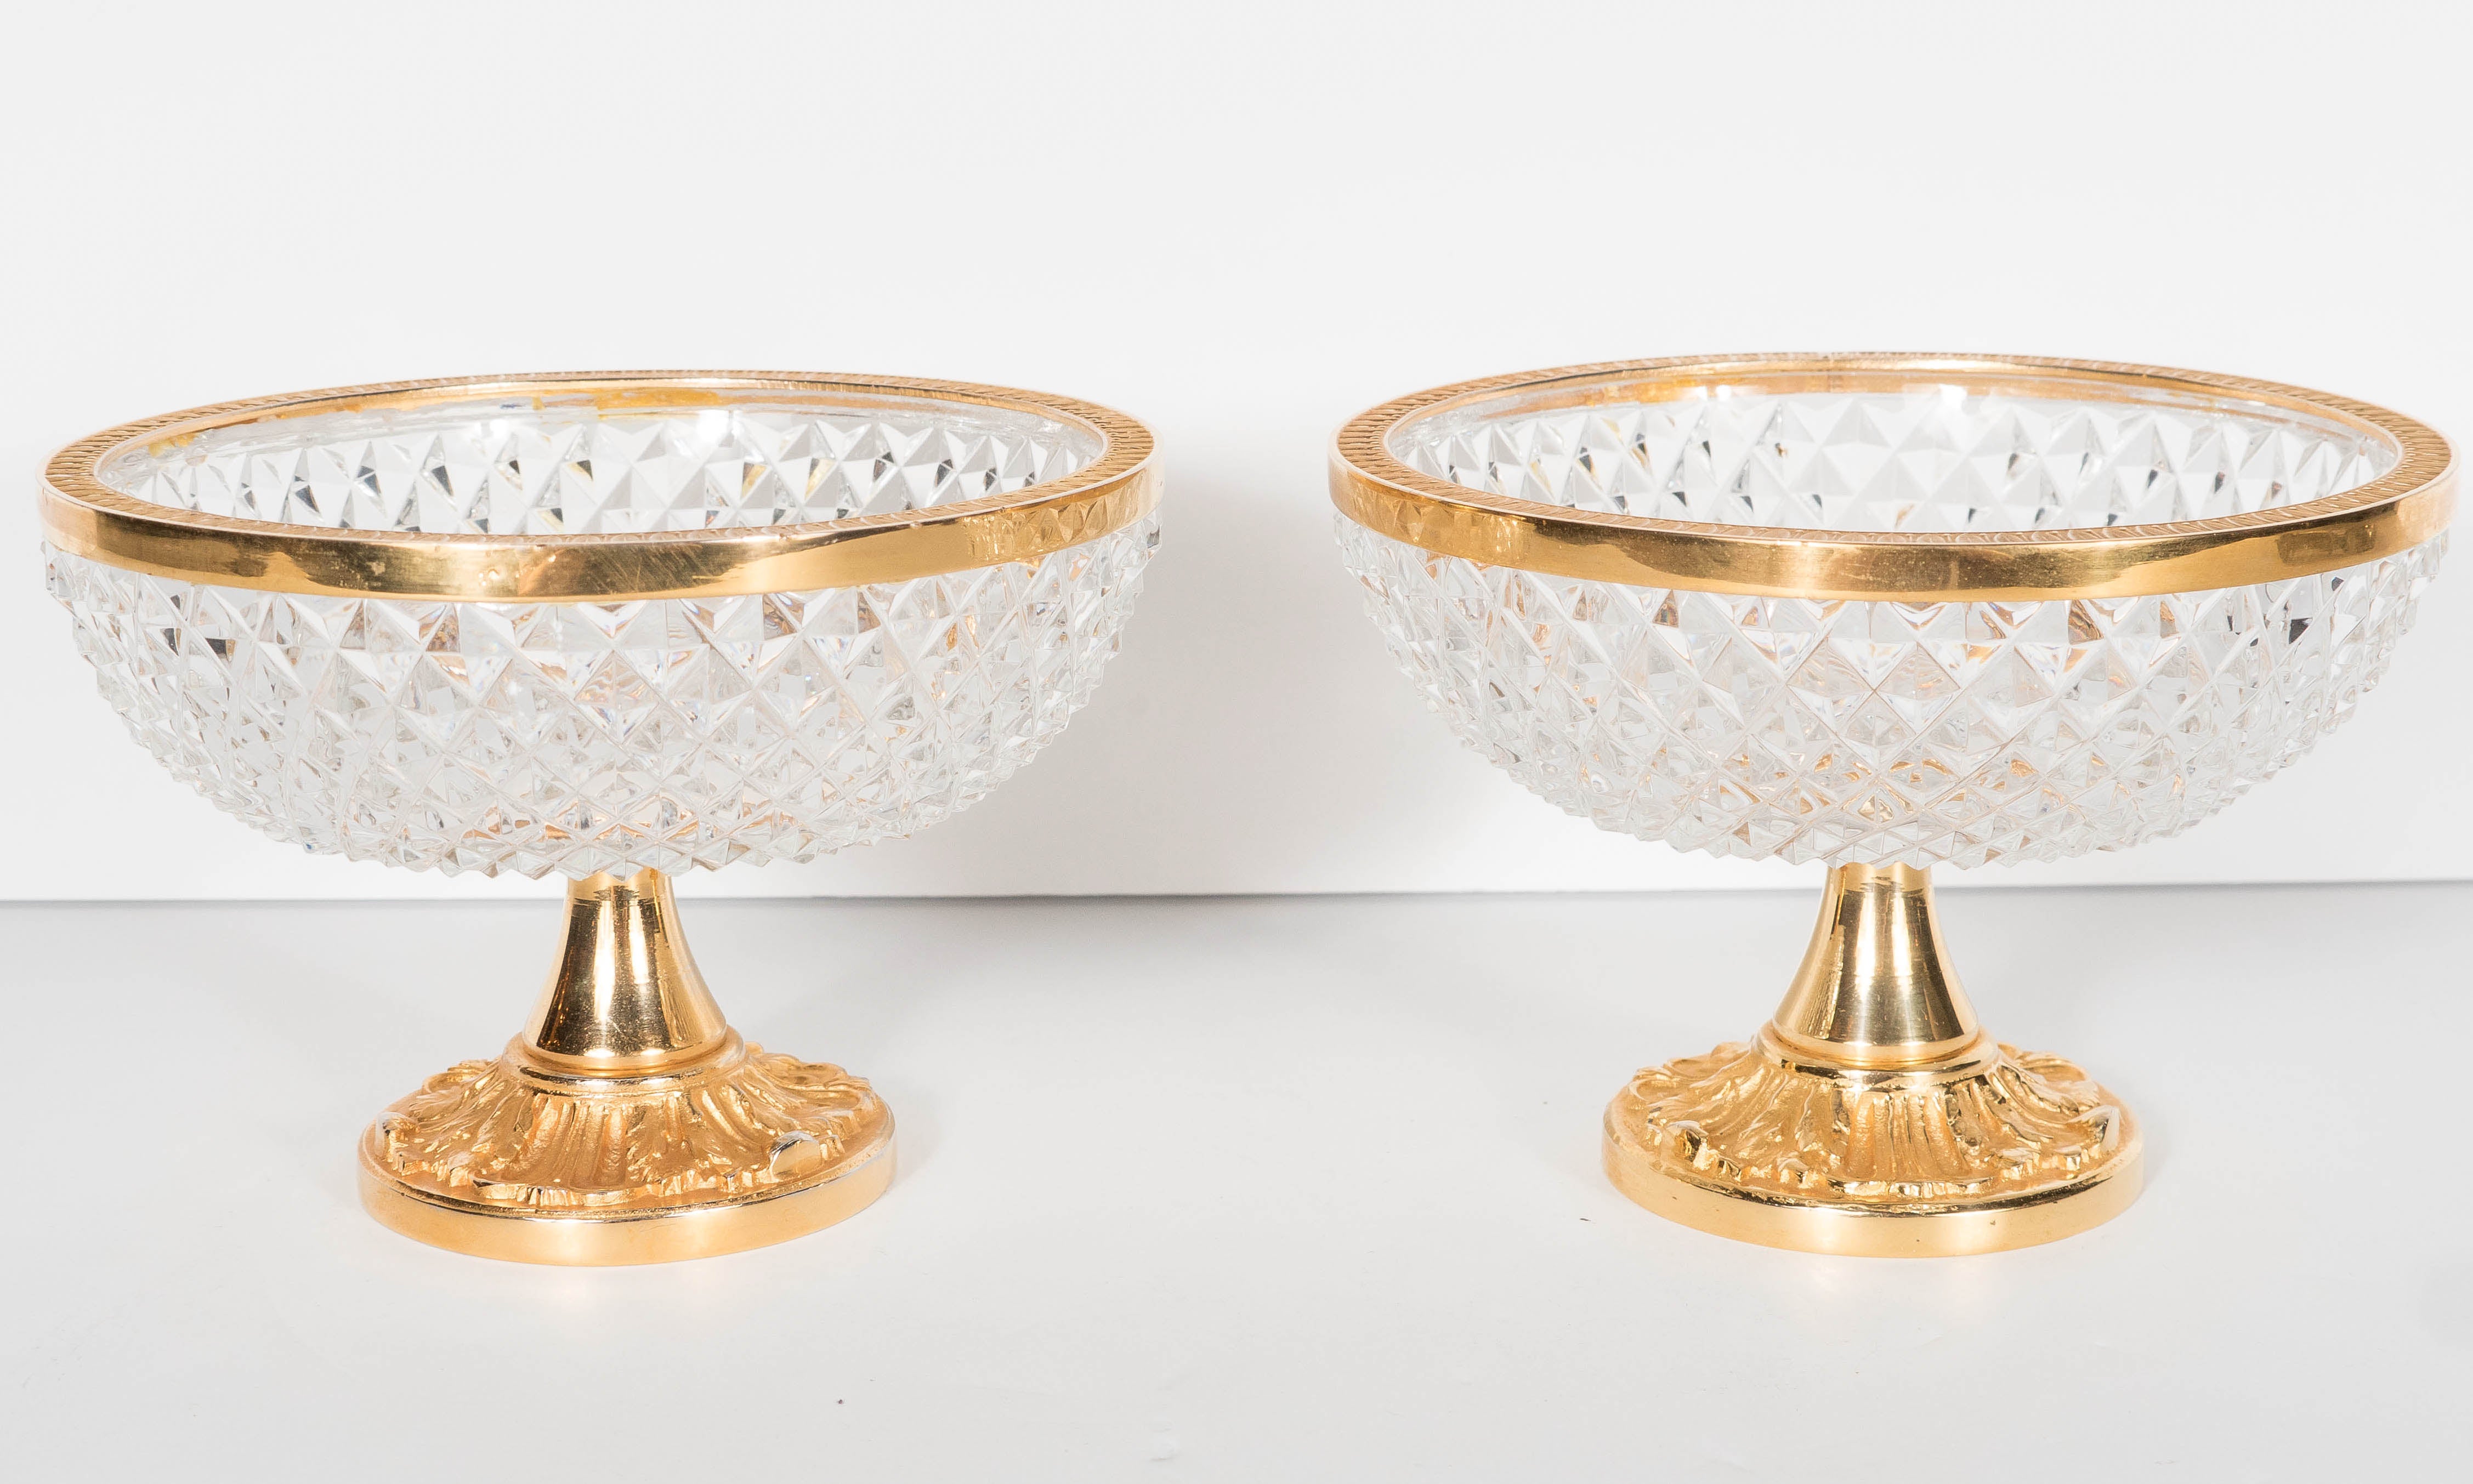 Elegant Pair of Early 20th Century French Gilt Bronze and Crystal Compotes